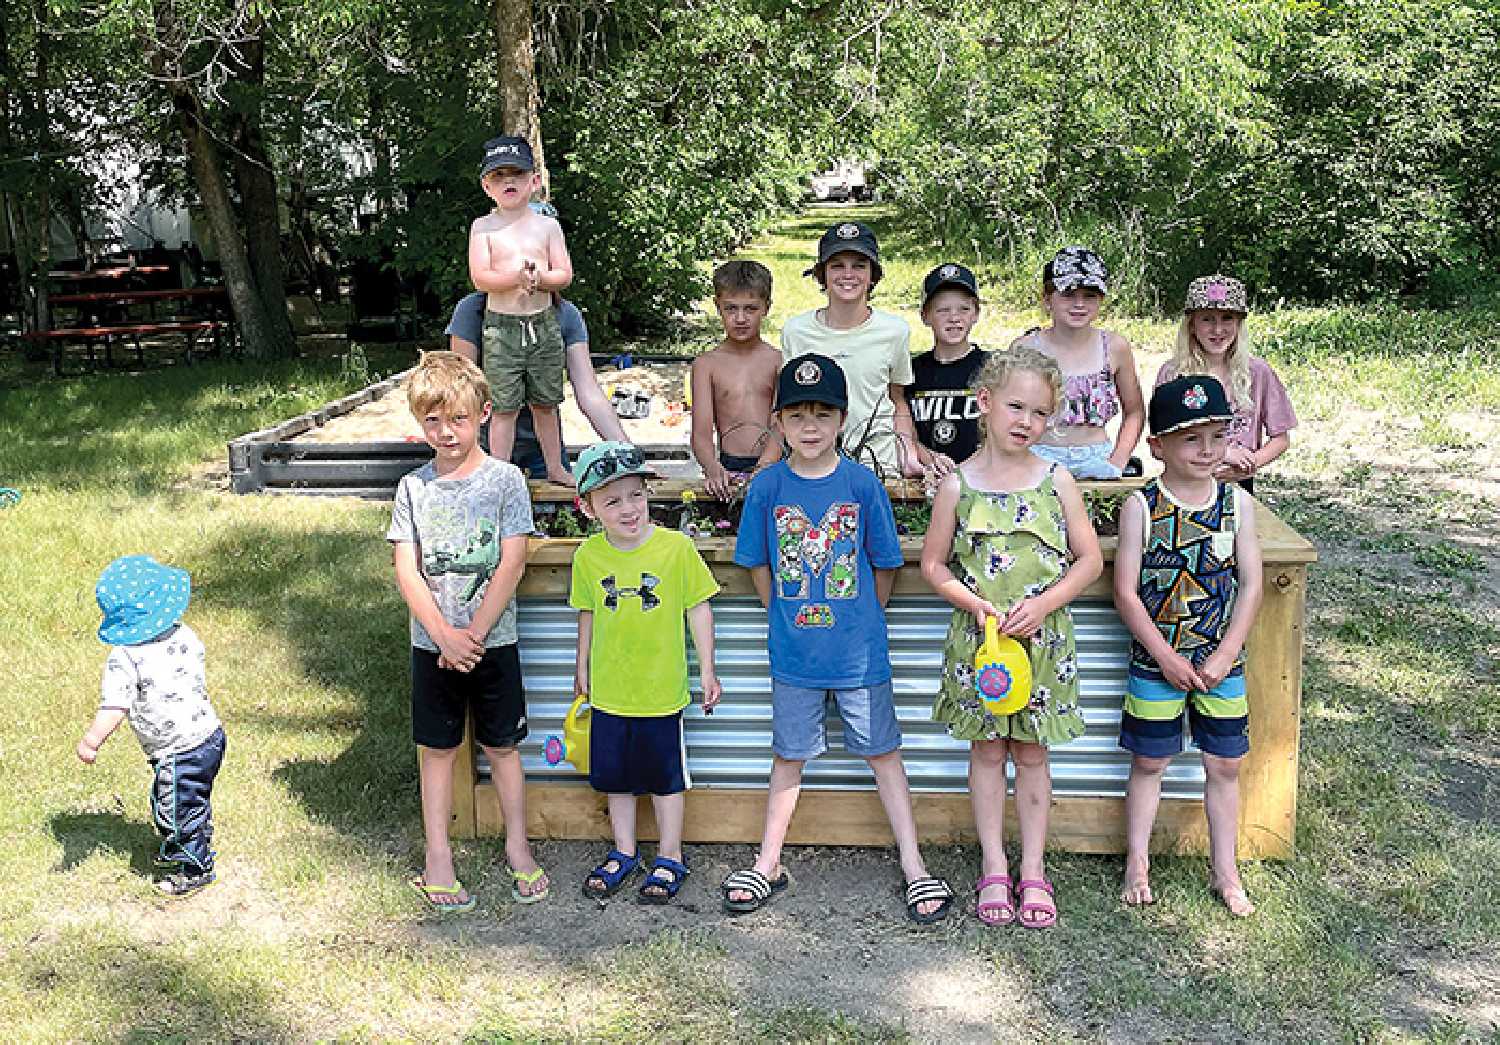 Kids whose families stay at the regional park planted flowers of their own at the newly added flower gardens, and will be responsible for taking care of them throughout summer to help contribute to the parks beautification.